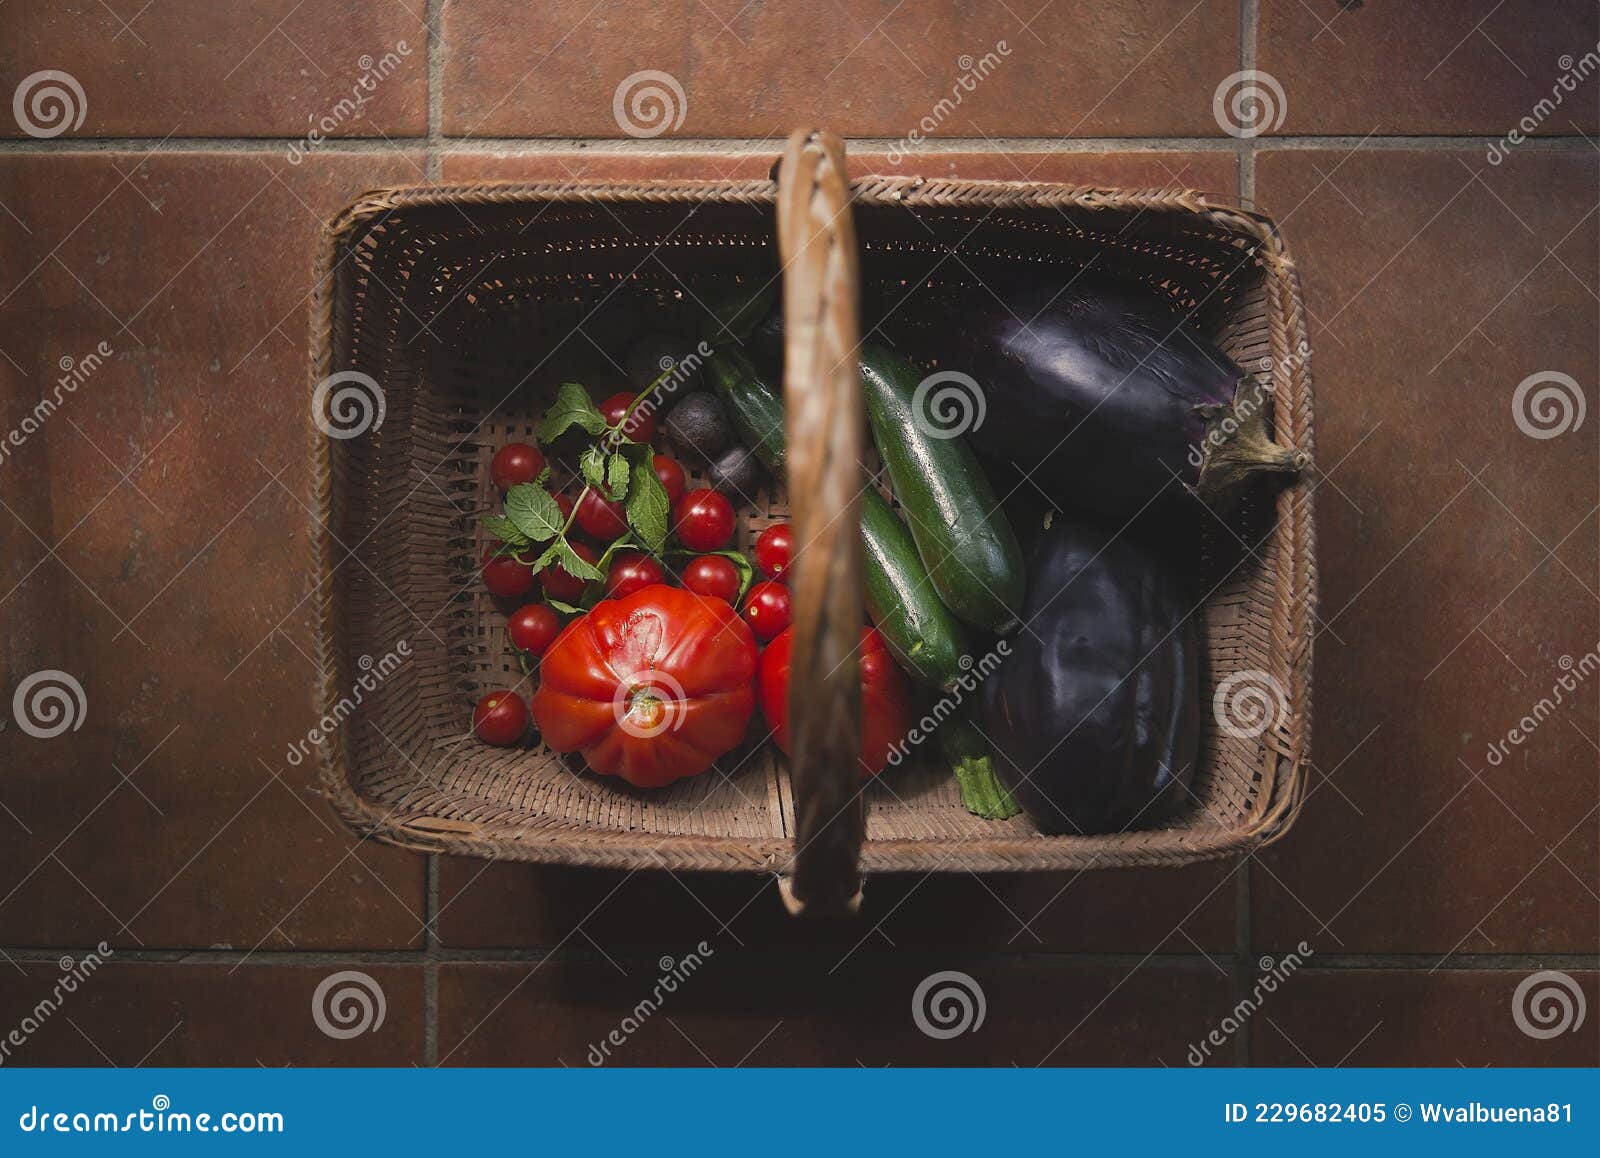 fresh and organic harvested vegetables in wicker basket